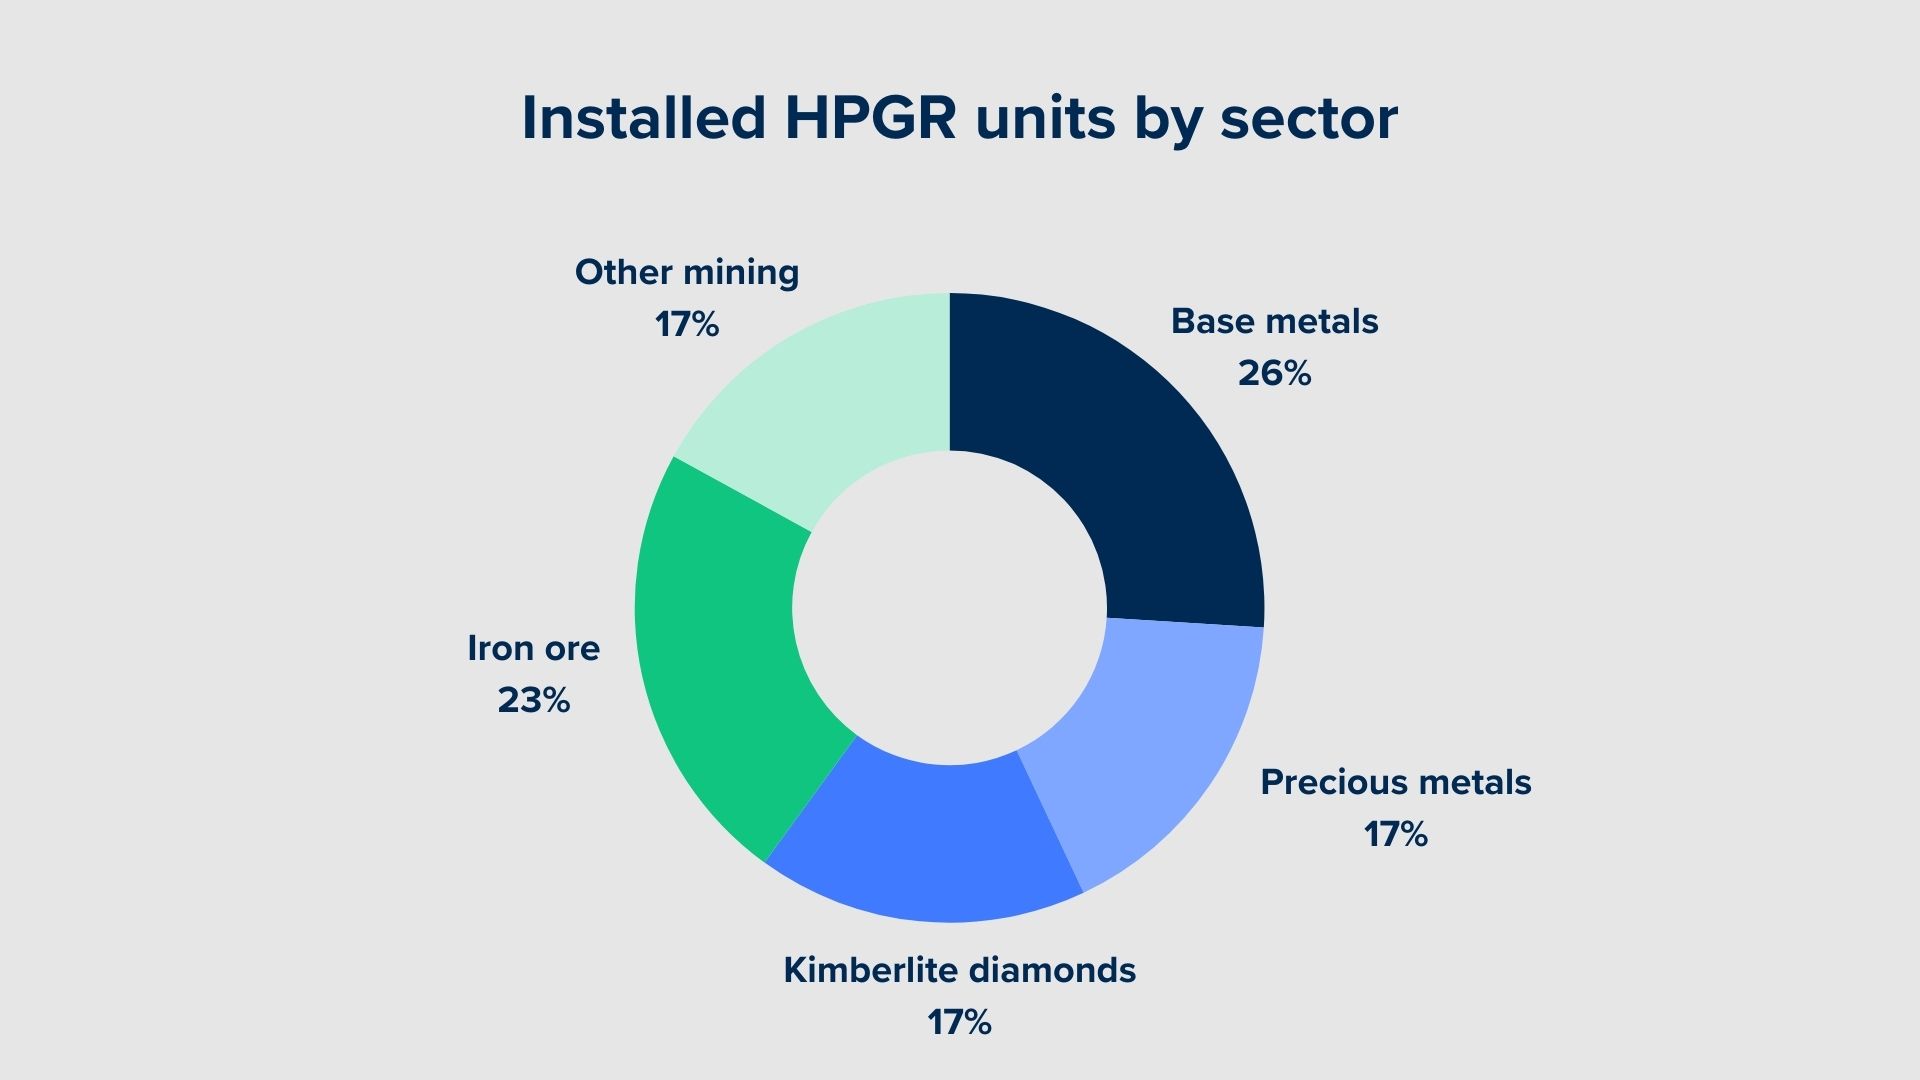 159 installations of HPGRs in mining